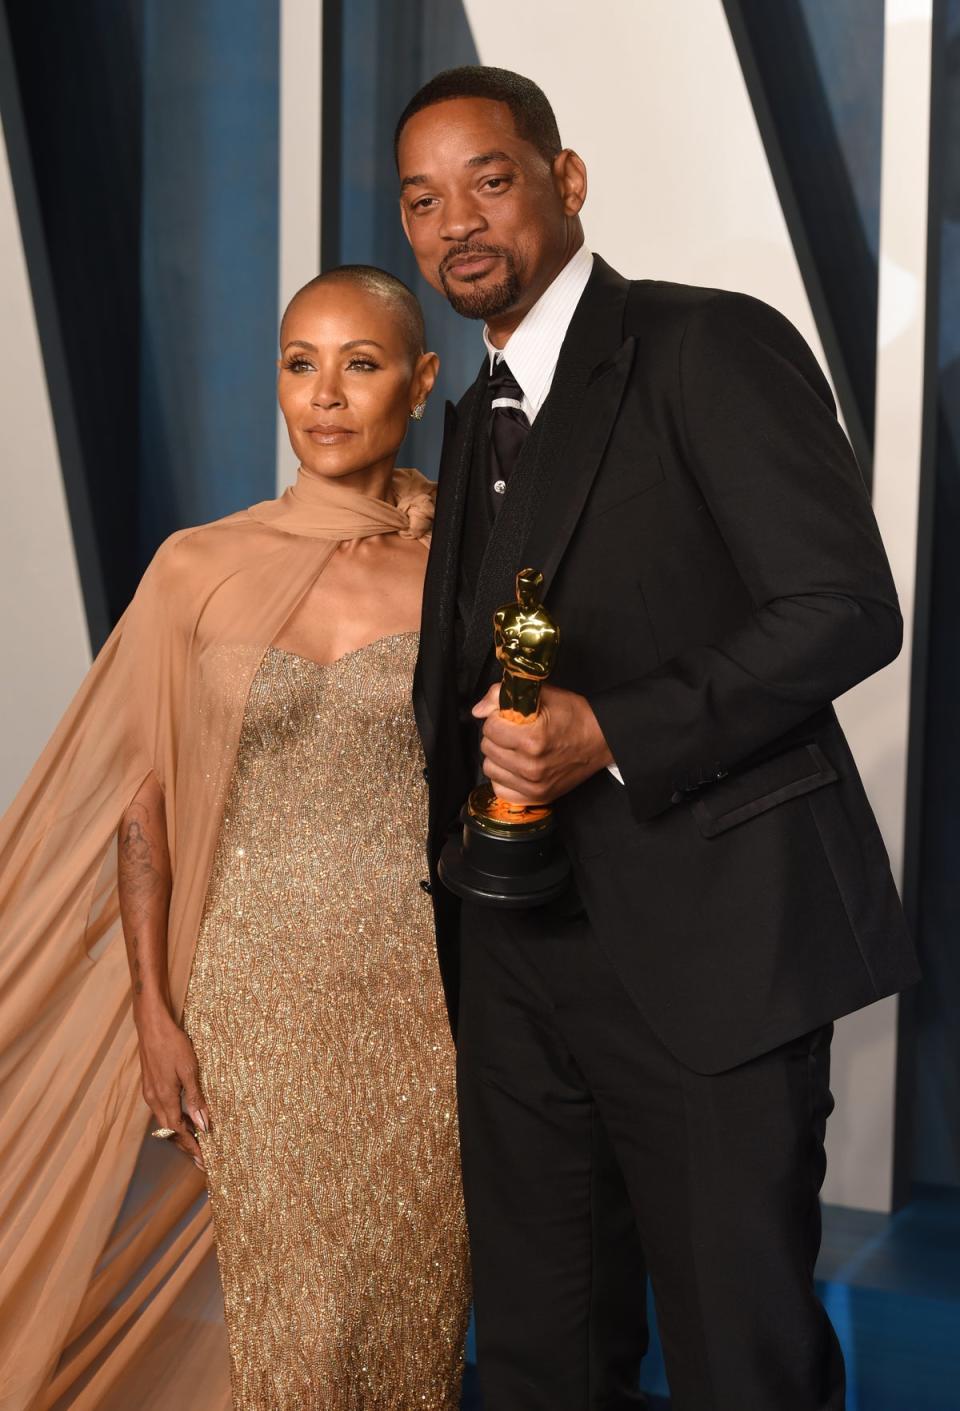 Jada Pinkett Smith promises details of her family’s ‘deep healing’ will be shared (Doug Peters/PA) (PA Wire)